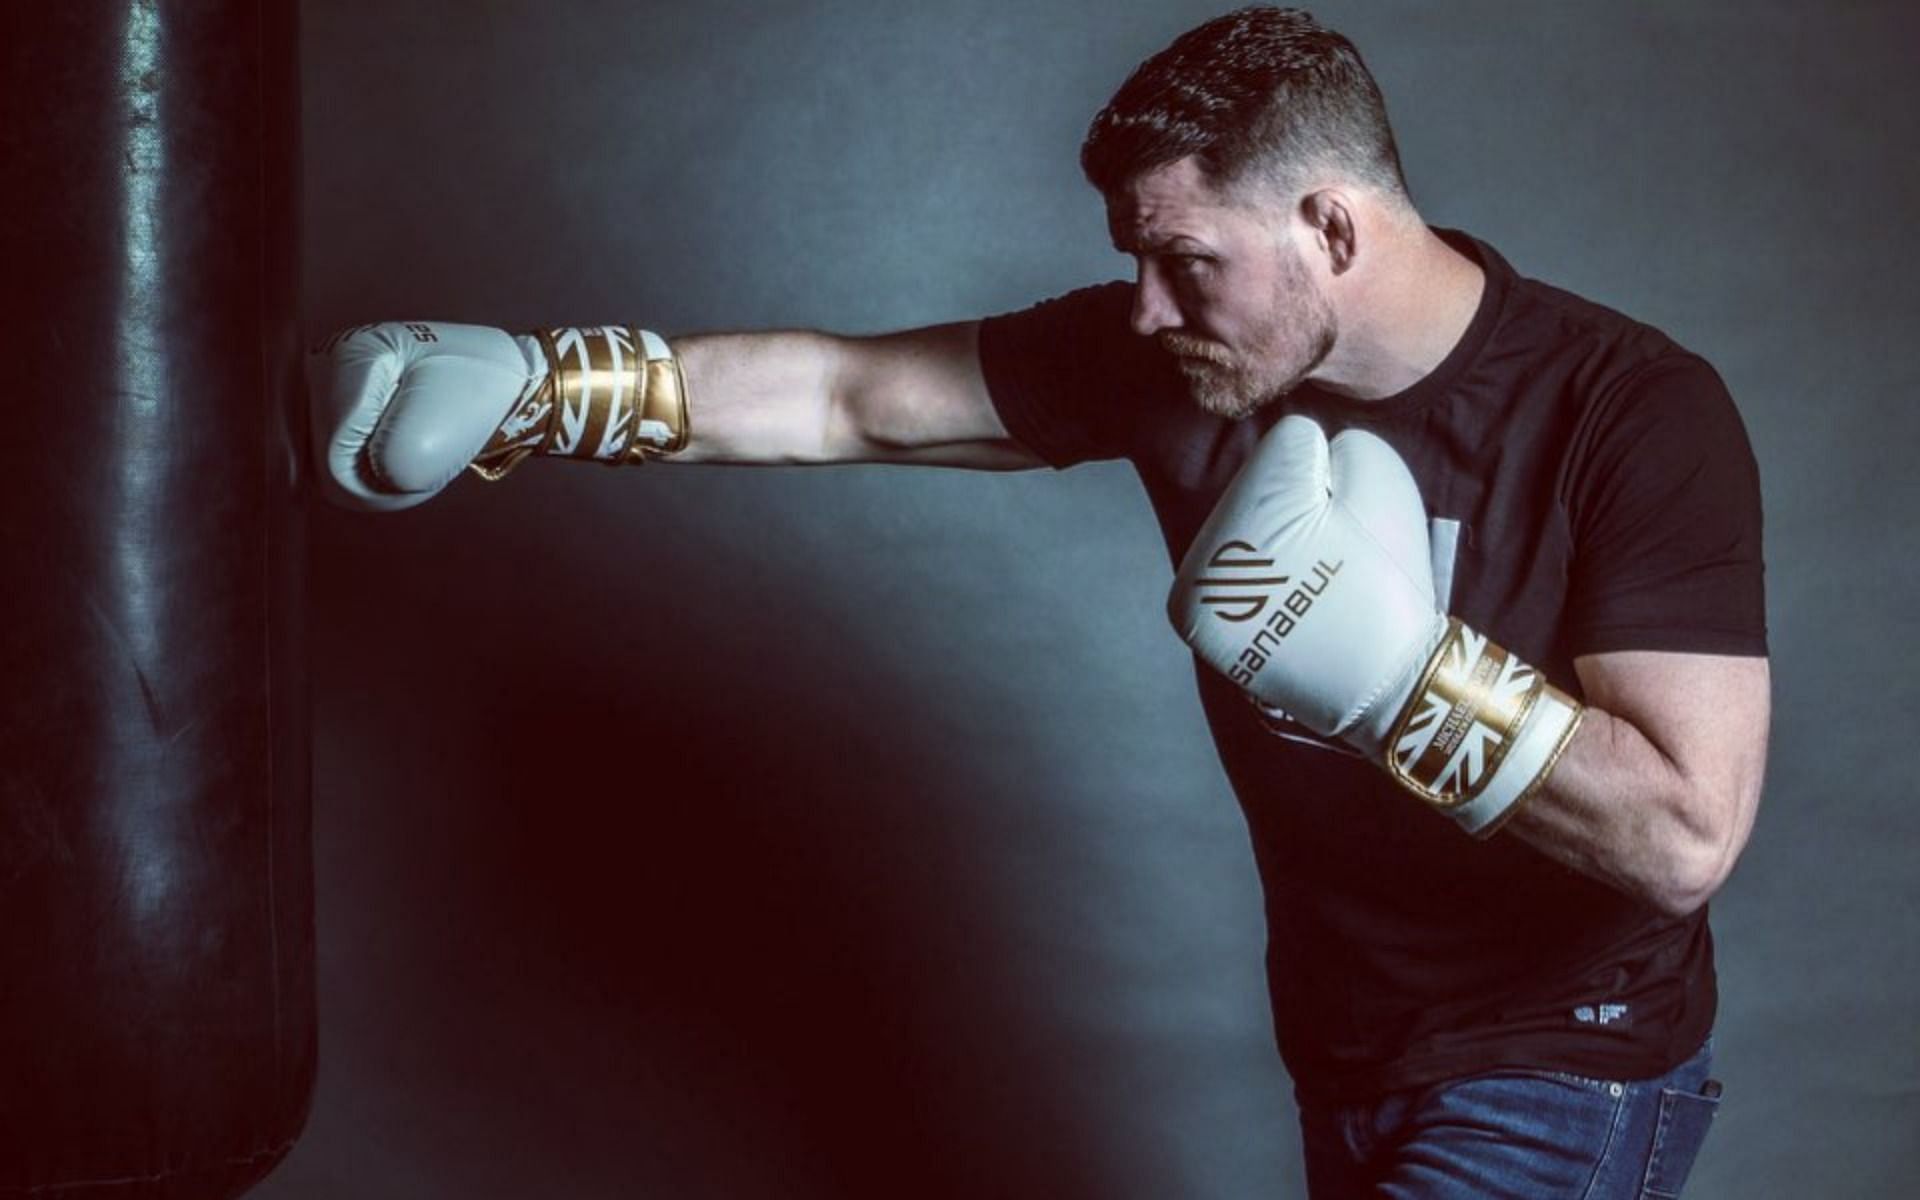 Michael Bisping [Images courtesy: @mikebisping on Instagram]